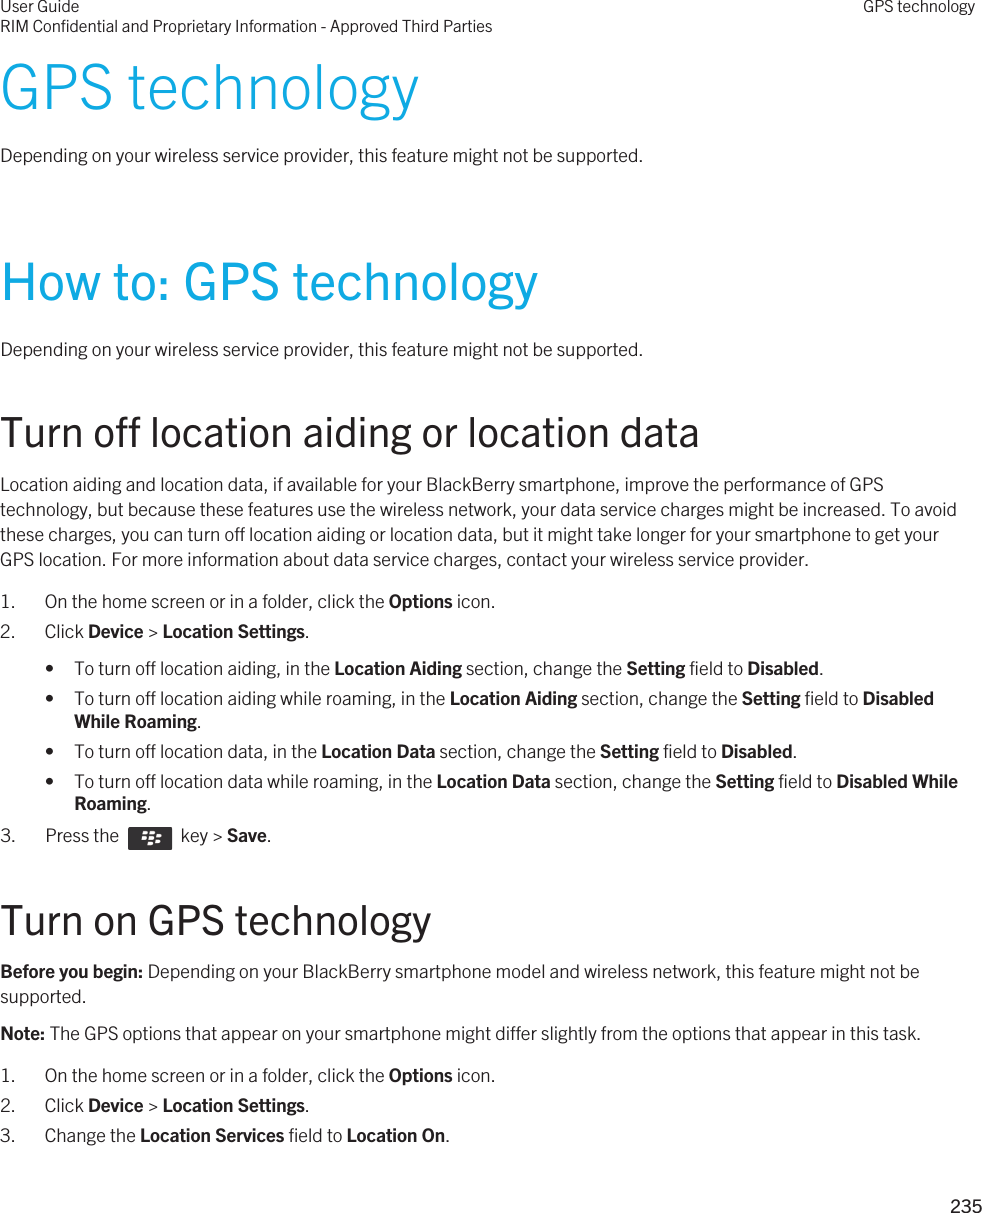 GPS technologyDepending on your wireless service provider, this feature might not be supported. How to: GPS technologyDepending on your wireless service provider, this feature might not be supported. Turn off location aiding or location dataLocation aiding and location data, if available for your BlackBerry smartphone, improve the performance of GPS technology, but because these features use the wireless network, your data service charges might be increased. To avoid these charges, you can turn off location aiding or location data, but it might take longer for your smartphone to get your GPS location. For more information about data service charges, contact your wireless service provider.1. On the home screen or in a folder, click the Options icon.2. Click Device &gt; Location Settings.• To turn off location aiding, in the Location Aiding section, change the Setting field to Disabled.• To turn off location aiding while roaming, in the Location Aiding section, change the Setting field to Disabled While Roaming.• To turn off location data, in the Location Data section, change the Setting field to Disabled.• To turn off location data while roaming, in the Location Data section, change the Setting field to Disabled While Roaming.3.  Press the    key &gt; Save. Turn on GPS technologyBefore you begin: Depending on your BlackBerry smartphone model and wireless network, this feature might not be supported. Note: The GPS options that appear on your smartphone might differ slightly from the options that appear in this task.1. On the home screen or in a folder, click the Options icon.2. Click Device &gt; Location Settings.3. Change the Location Services field to Location On.User GuideRIM Confidential and Proprietary Information - Approved Third PartiesGPS technology235 